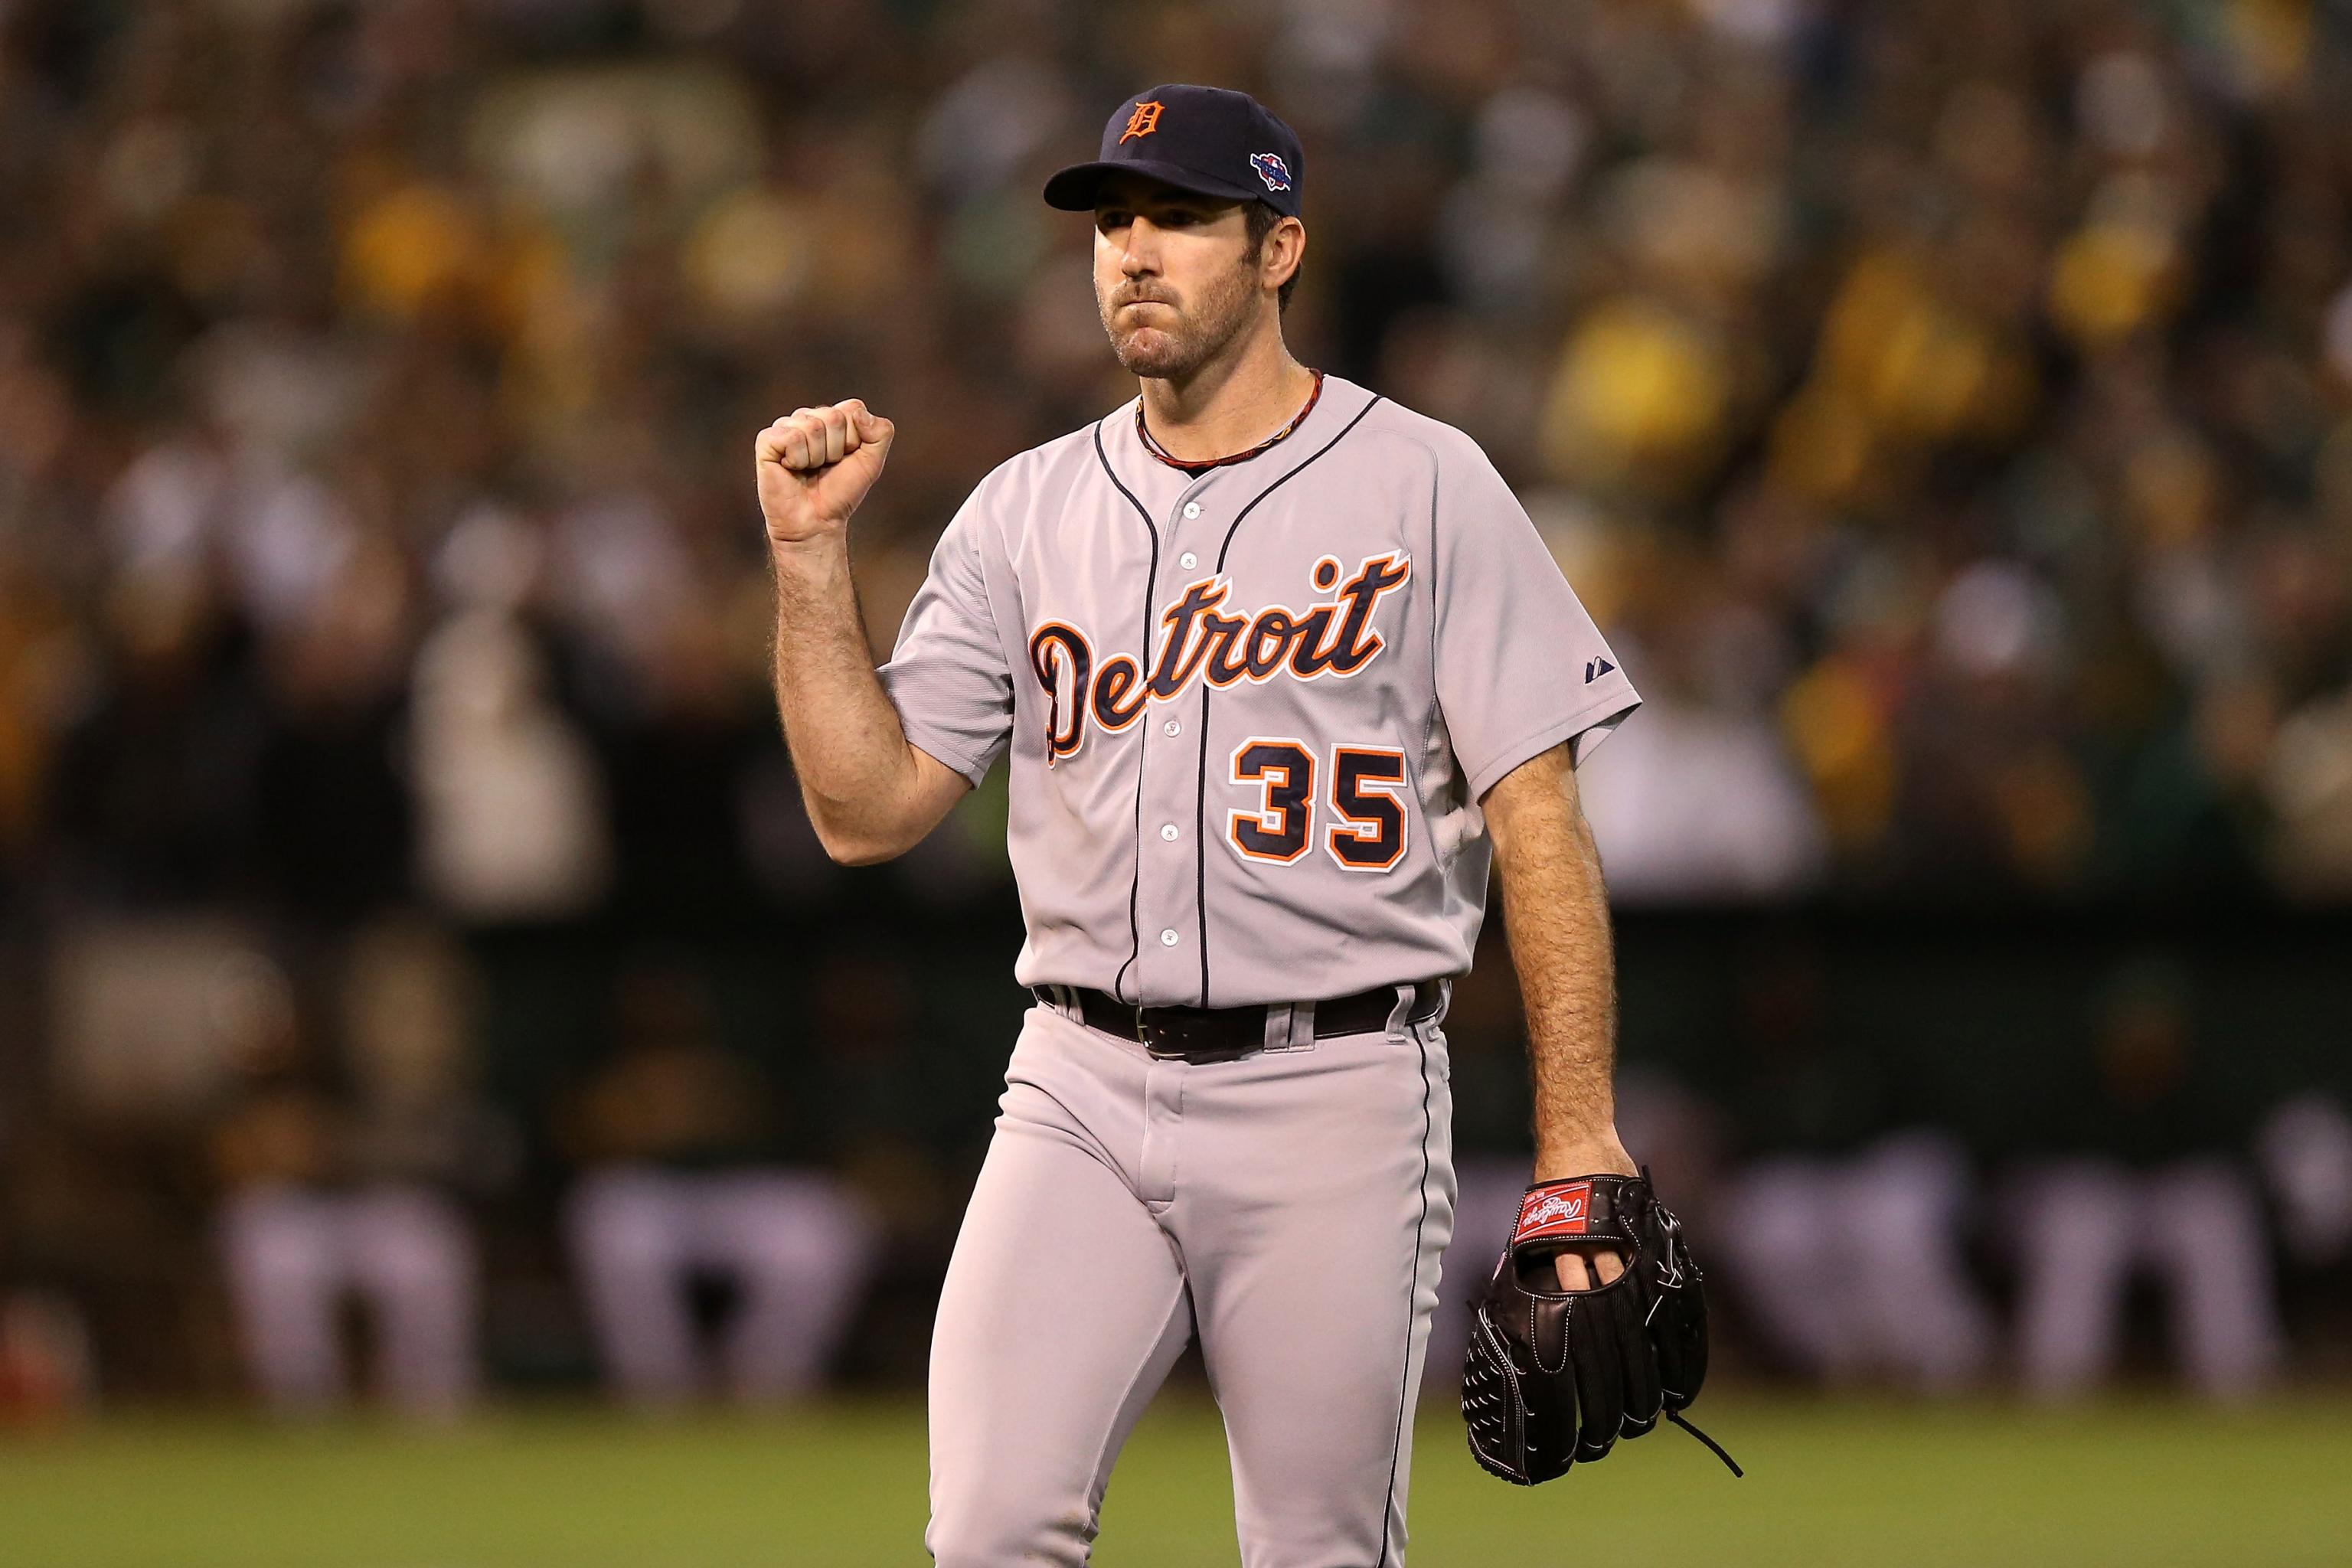 Detroit Tigers Opening Day 2012: A fantasy for many fans 